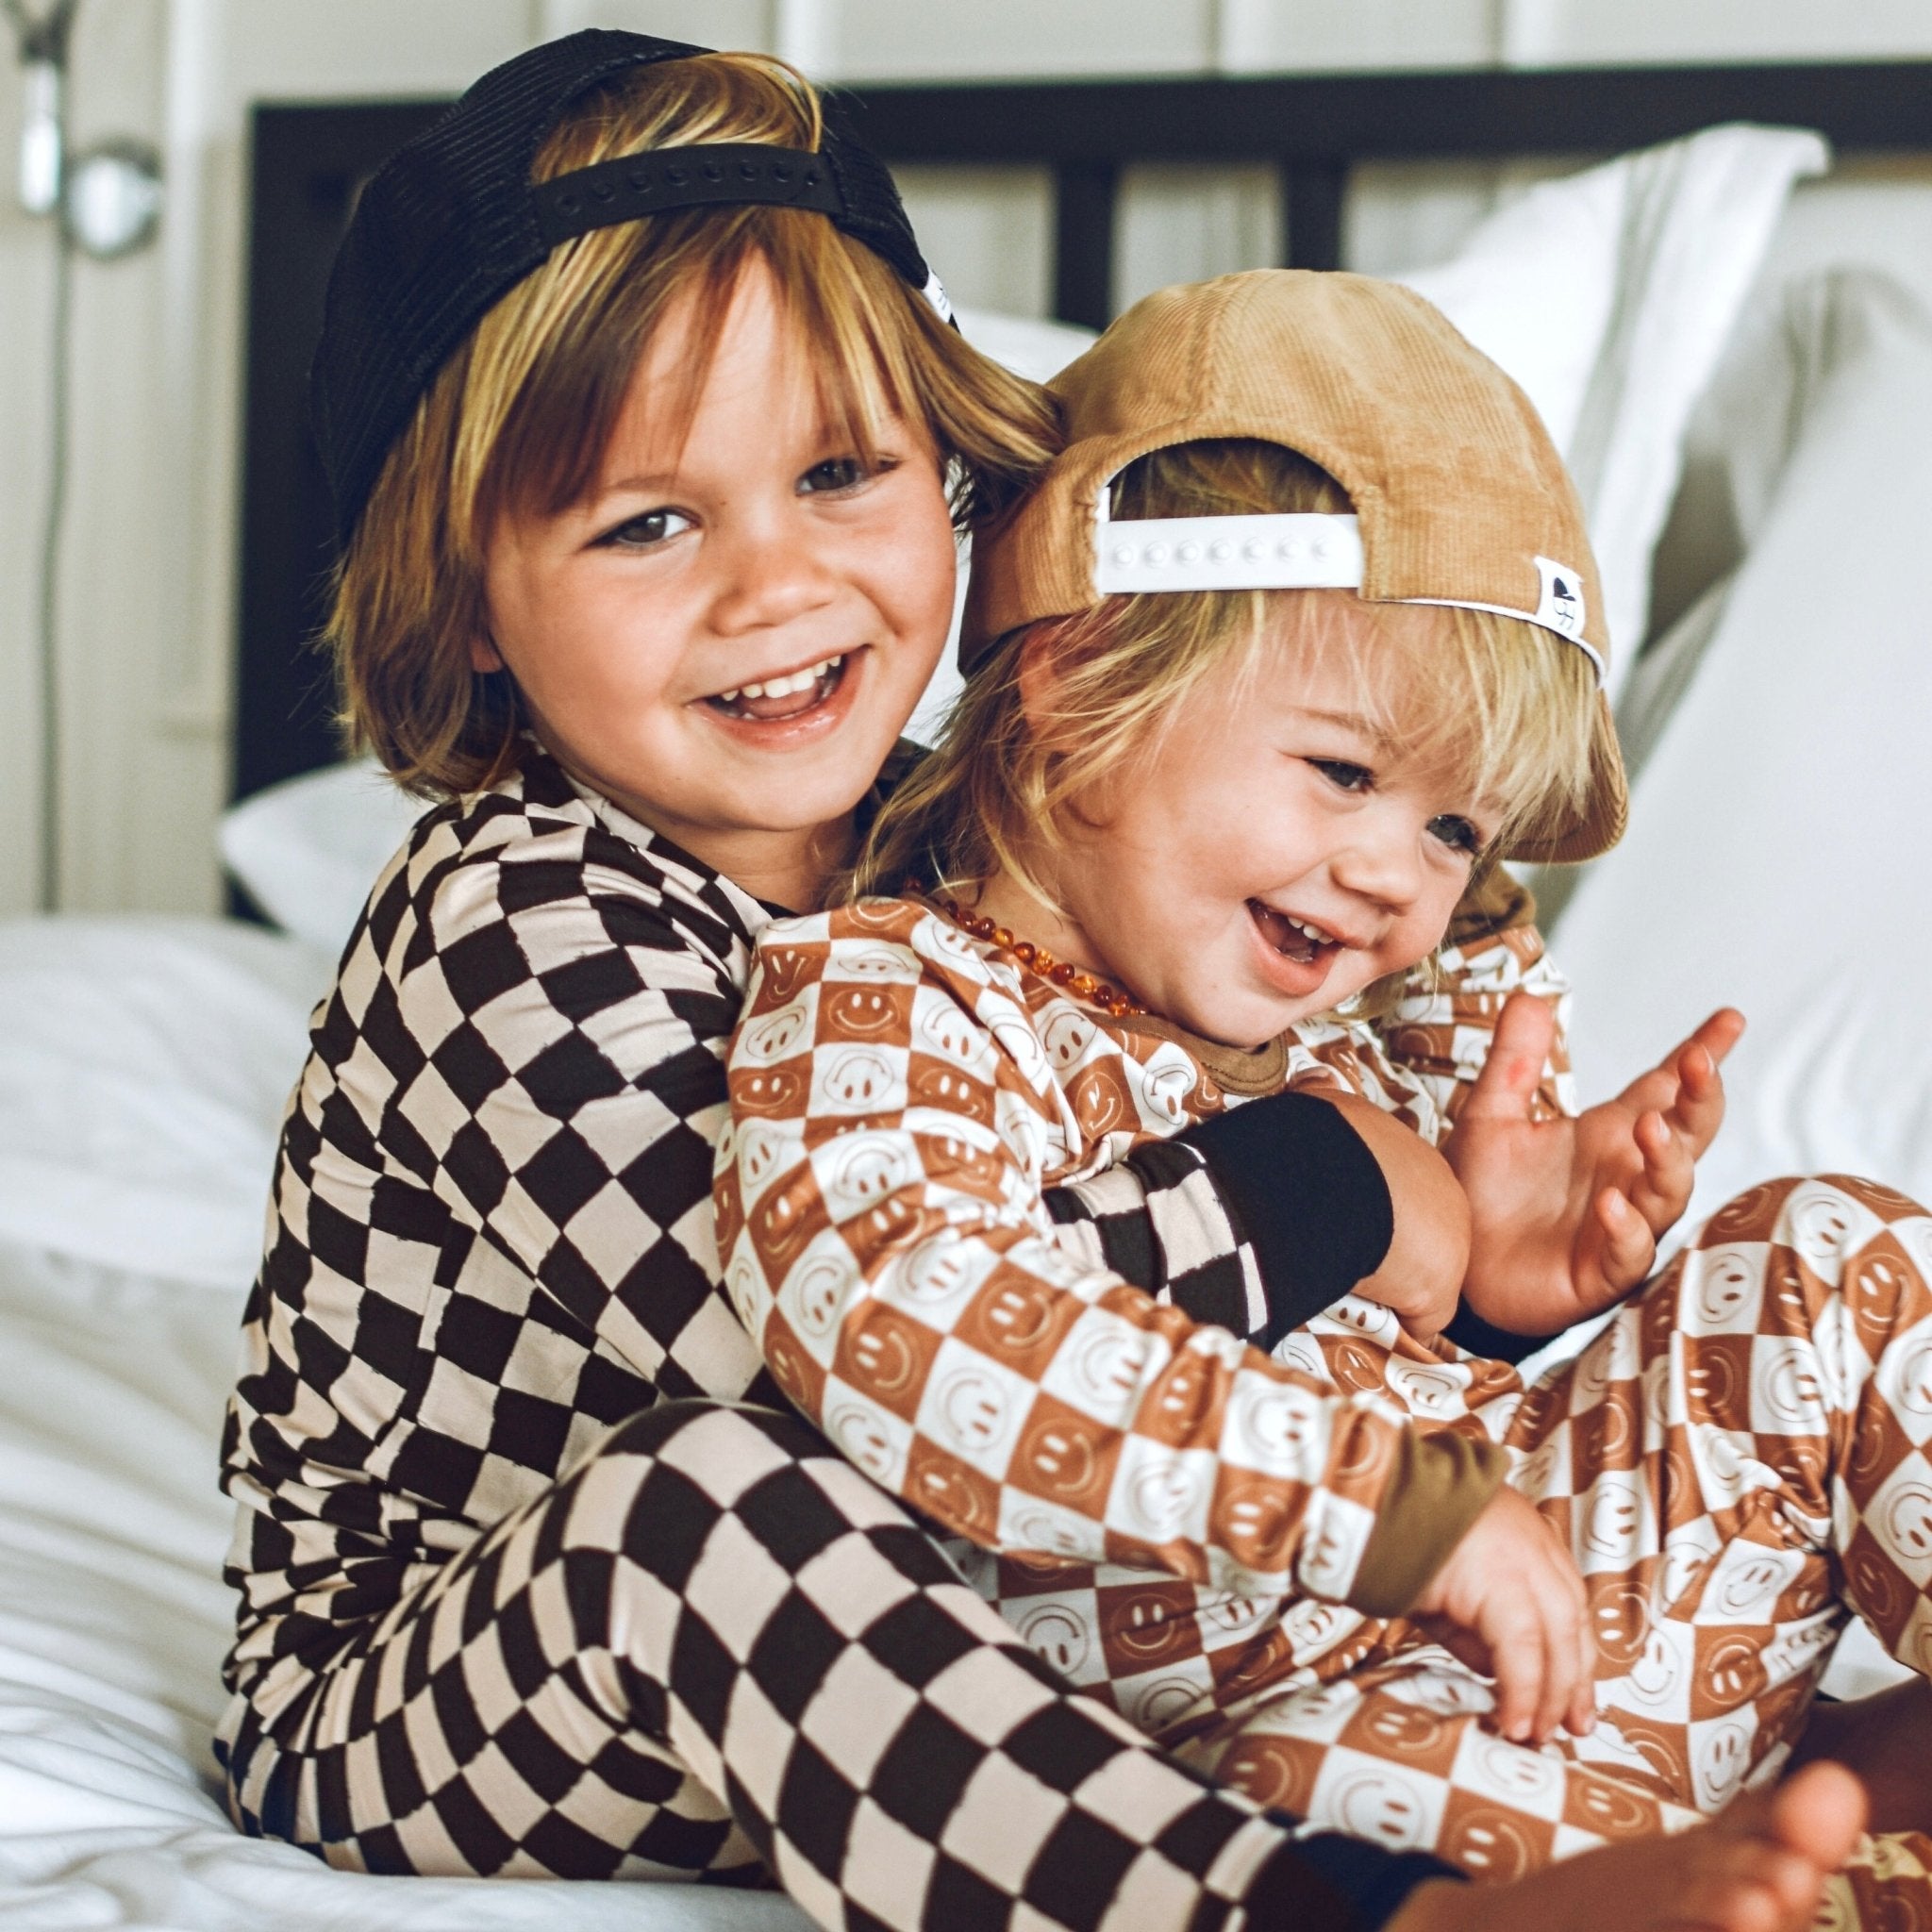 Copper Smiley Long Sleeve Pajamas - George Hats